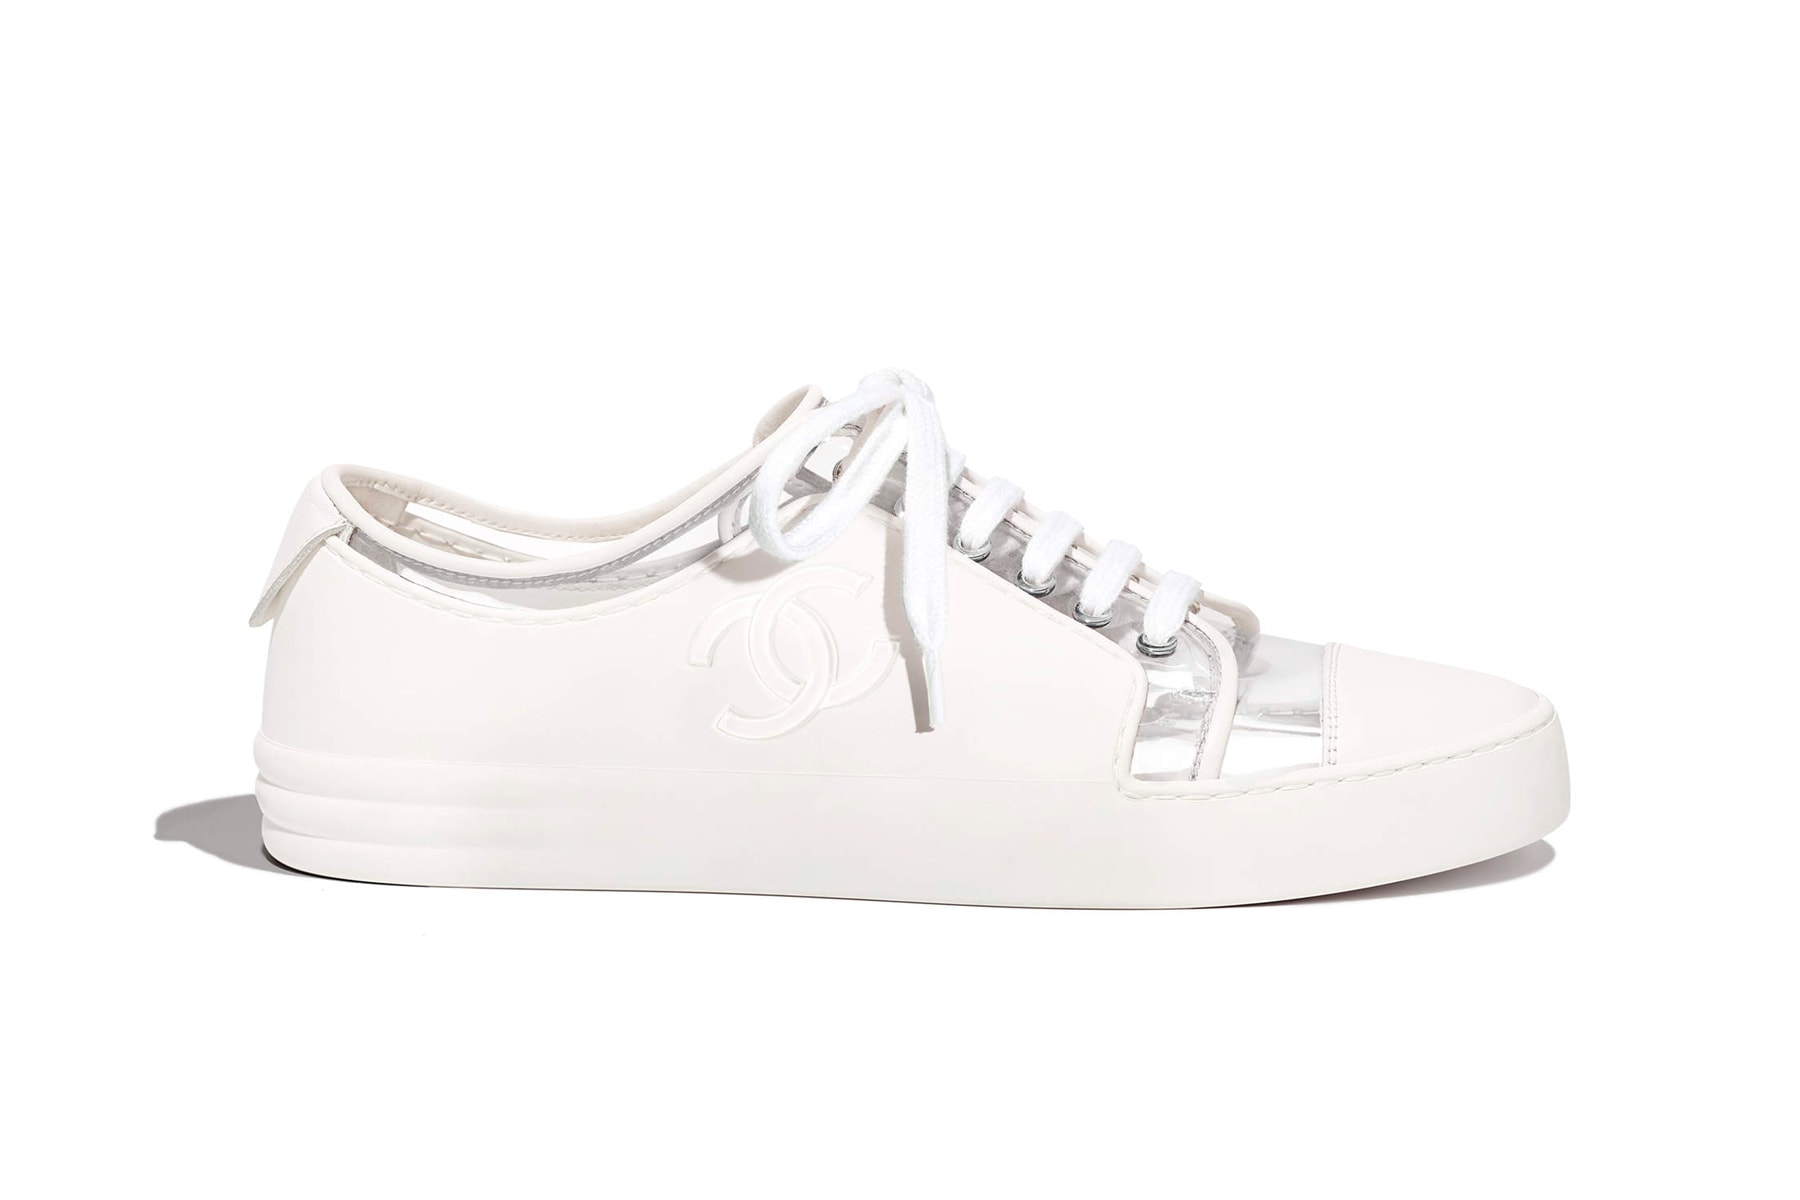 Chanel Spring Summer 2018 Sneaker Collection Colorways Release Price Where to Buy White Silver Leather Low Trainer Karl Lagerfeld Double C Logo